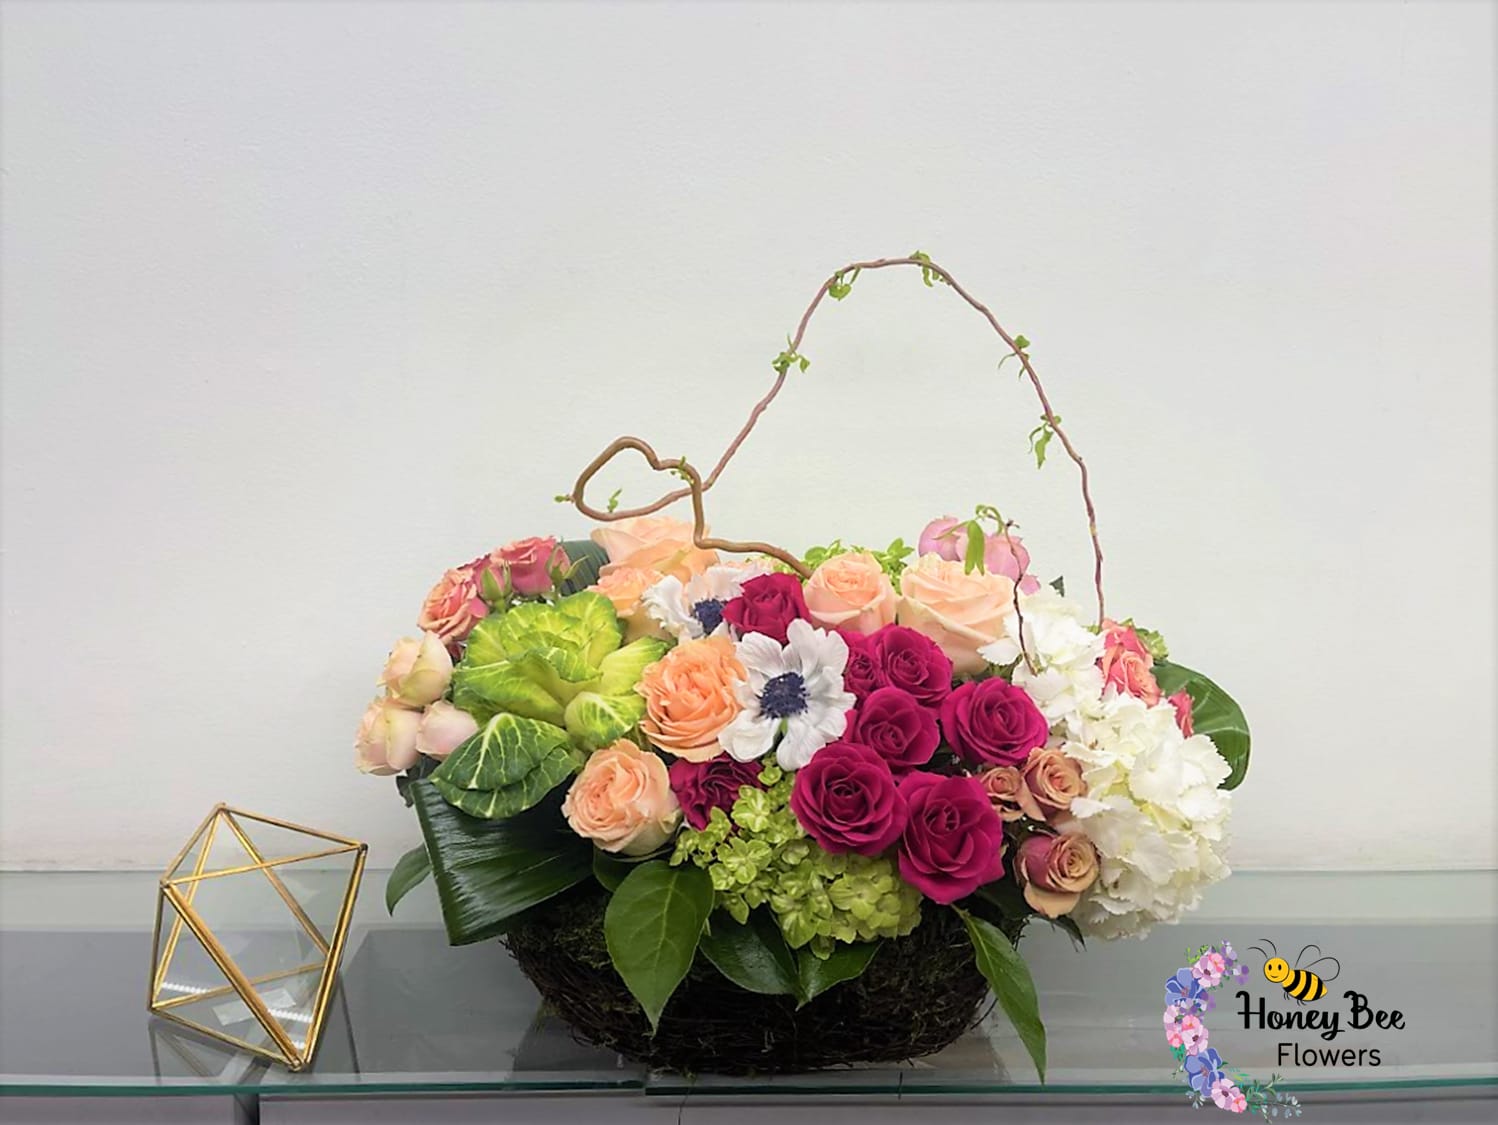 Garden Beauty - A beautiful combination colorful flowers arranged in a unique waterproof moss basket that will bring the magical feeling of a garden into the home.  Color substitutions available! Please let us know in the special instructions section during check out. 